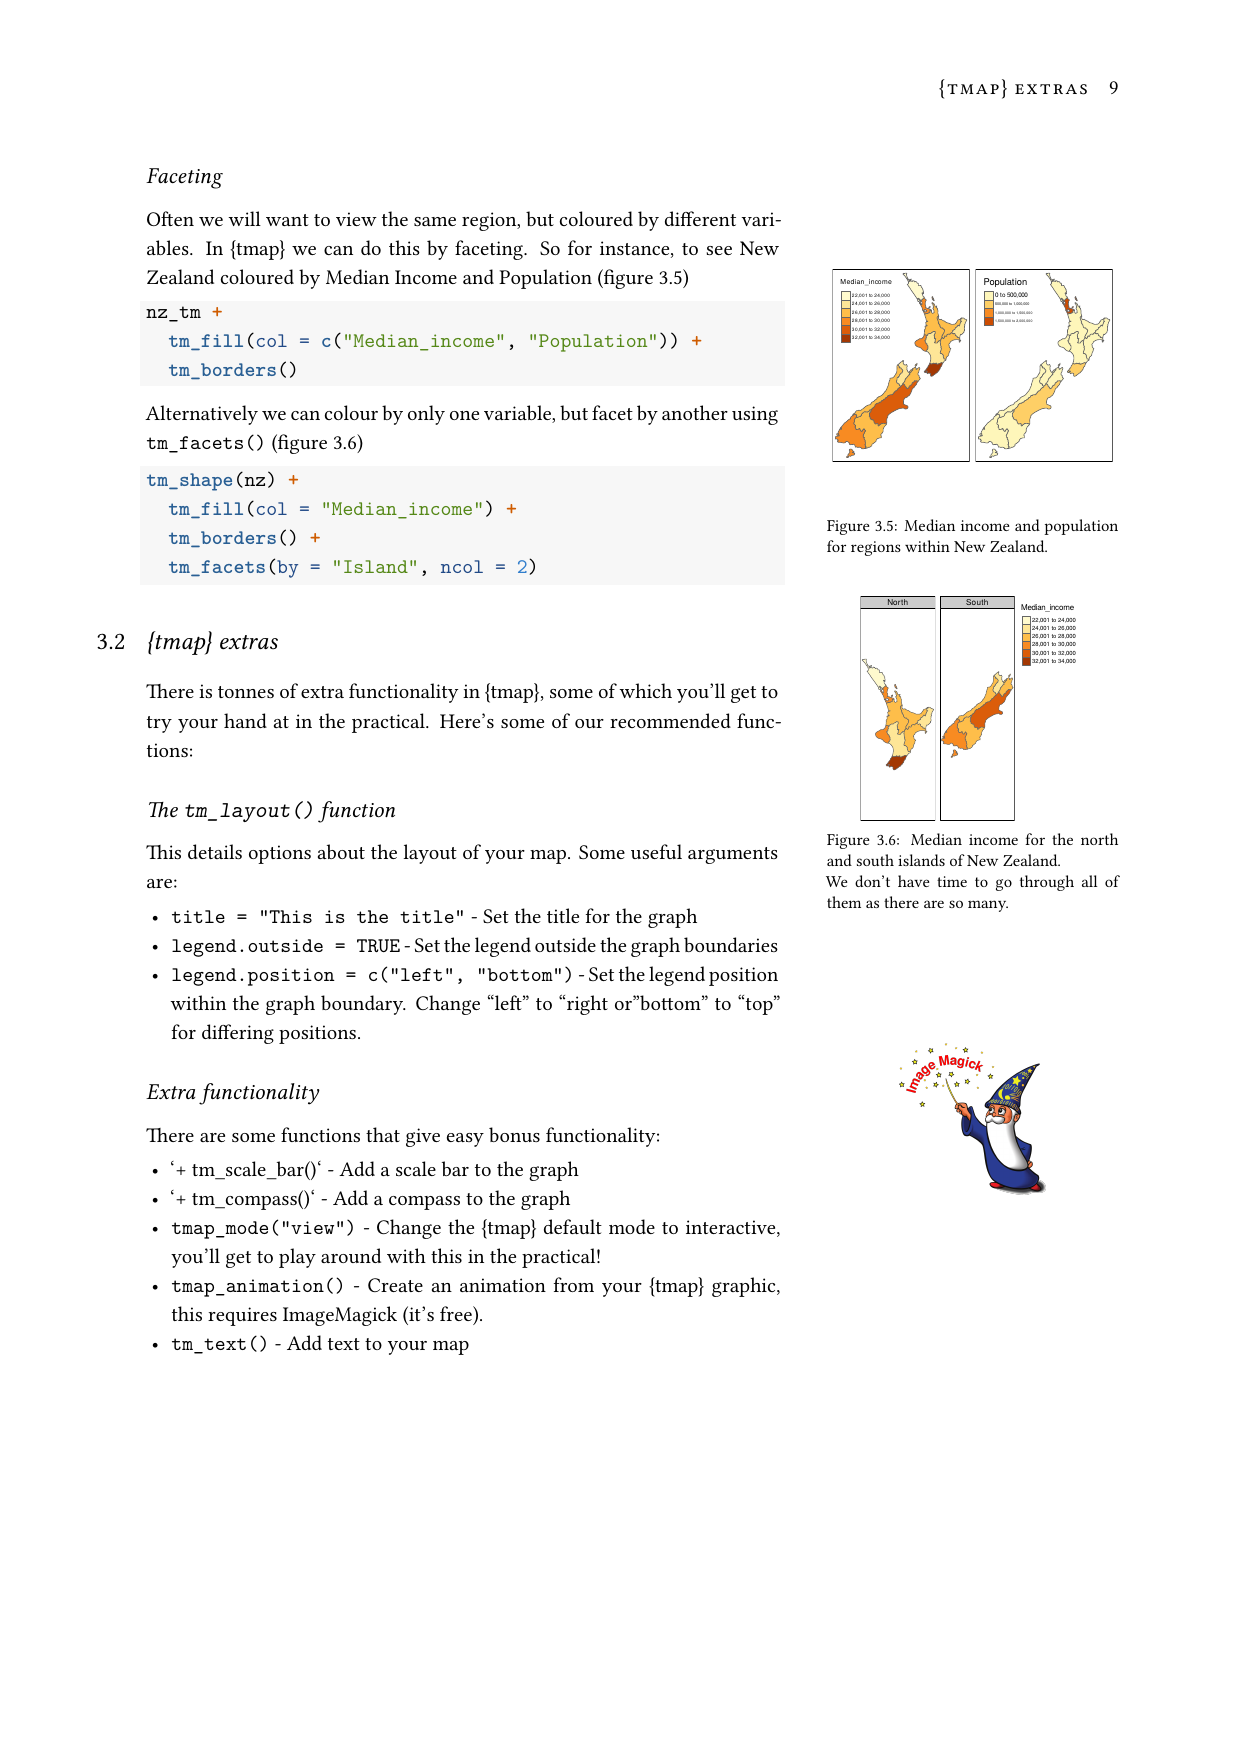 Example course material for 'Spatial Data Analysis with R